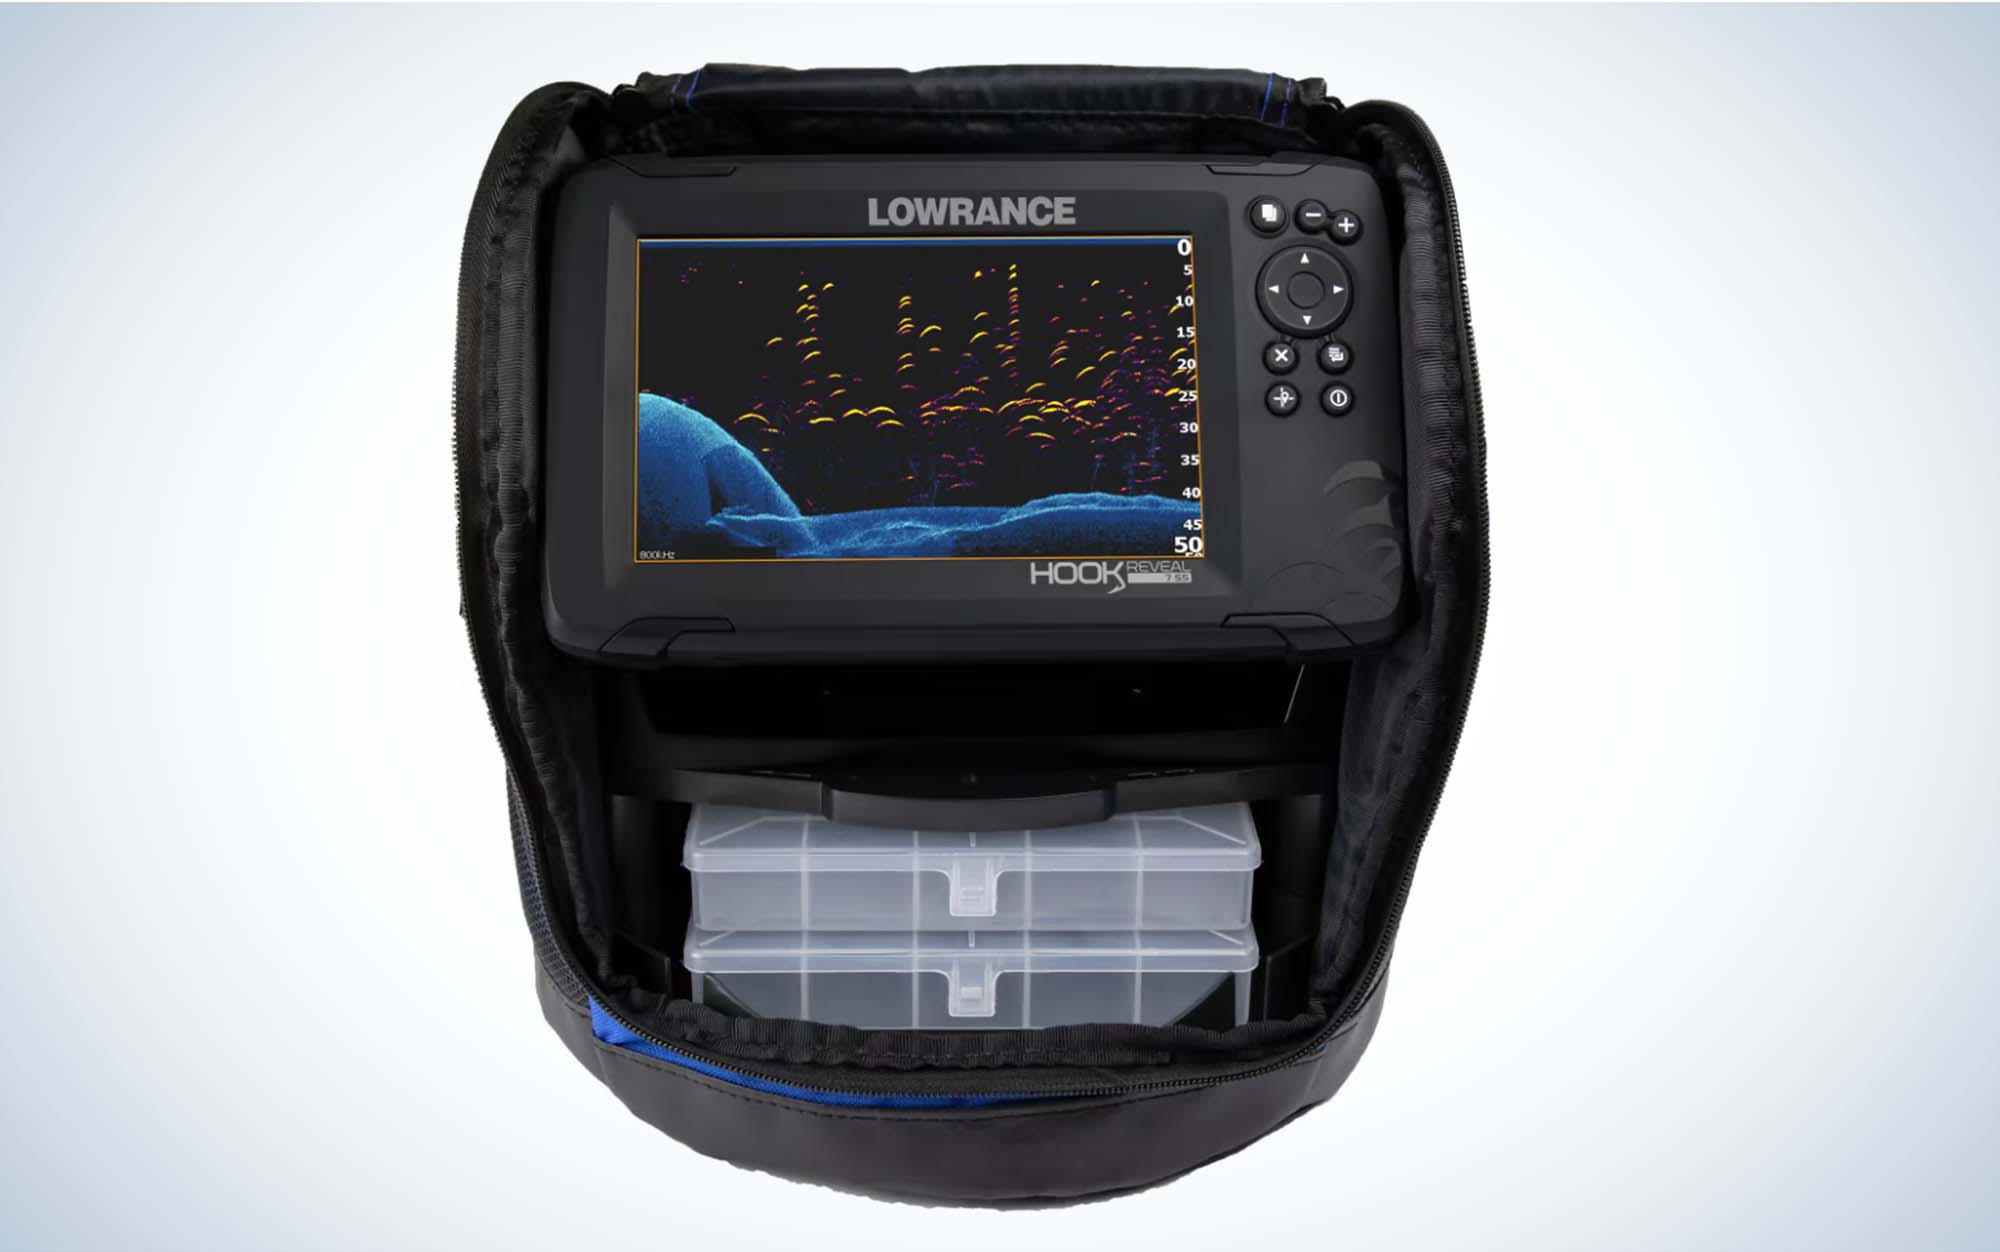 Portable WiFi Fish Finder with GPS for Kayaks, Boats, and Ice Fishing -  Pro+